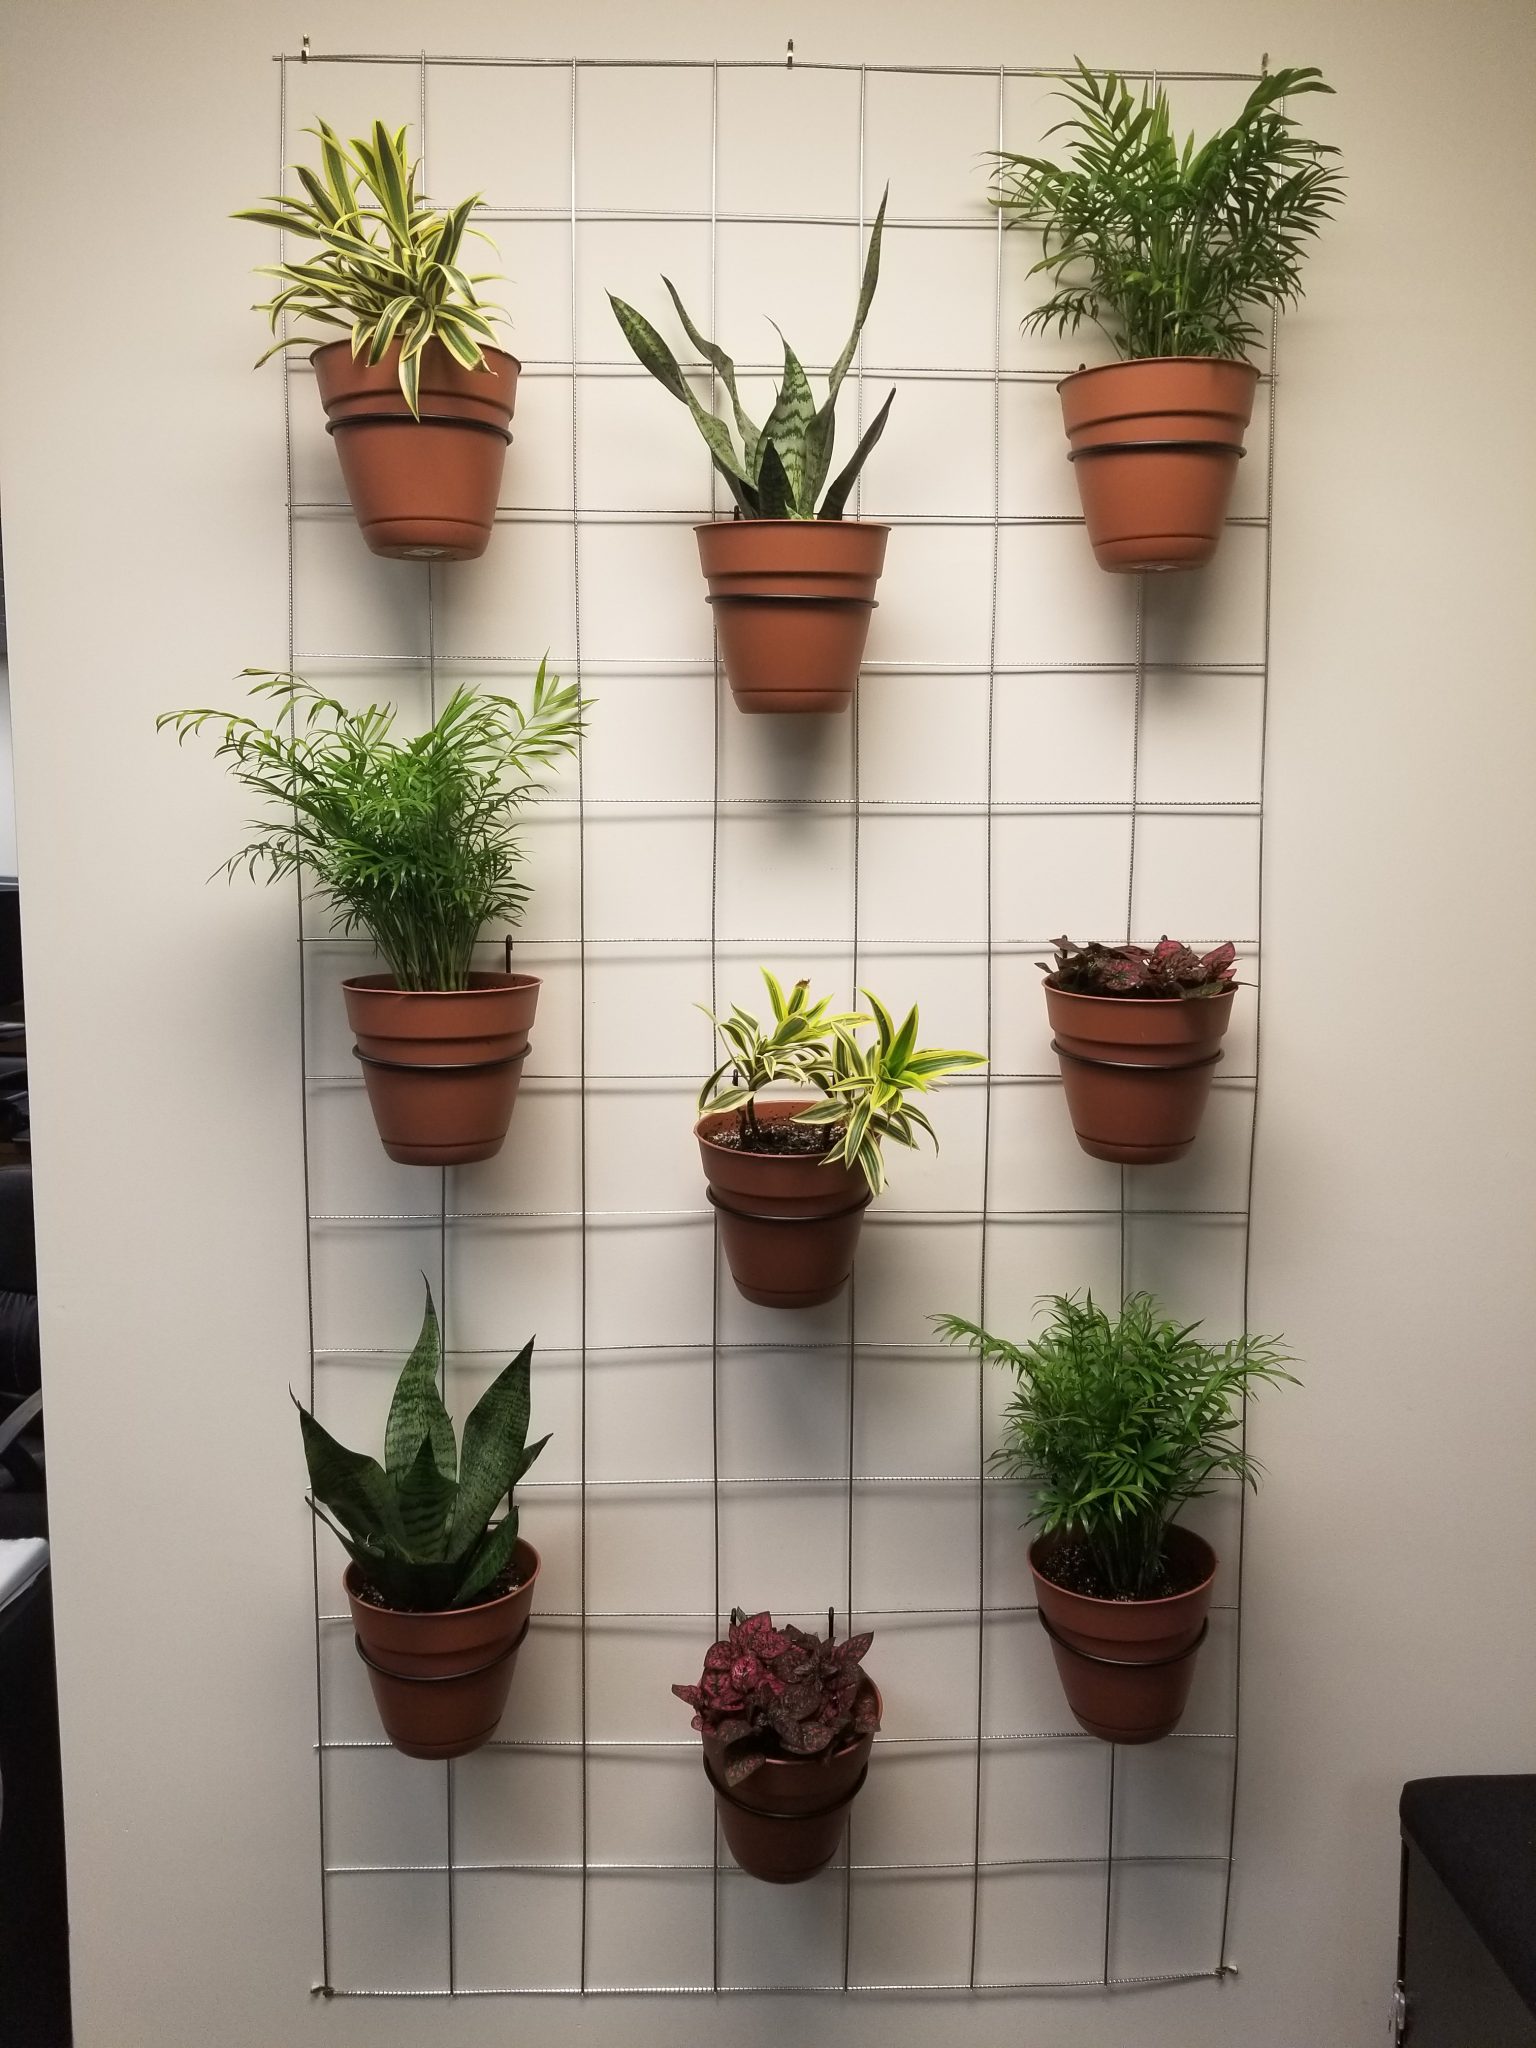 I’ve been on a journey these last few months to green our office – literally-- by building and testing a version of a living plant wall in the SBC office. Back in 2018, our team realized that all of the nature in our office was hung up in 2D picture frames on the wall and, as sustainability professionals, we wanted more of a connection to nature in our daily lives. Naturally, I accepted the challenge to “green up” our office without breaking the bank on expensive (though beautiful) living plant walls. Here’s how to add some healthy greenery to your office on a budget: